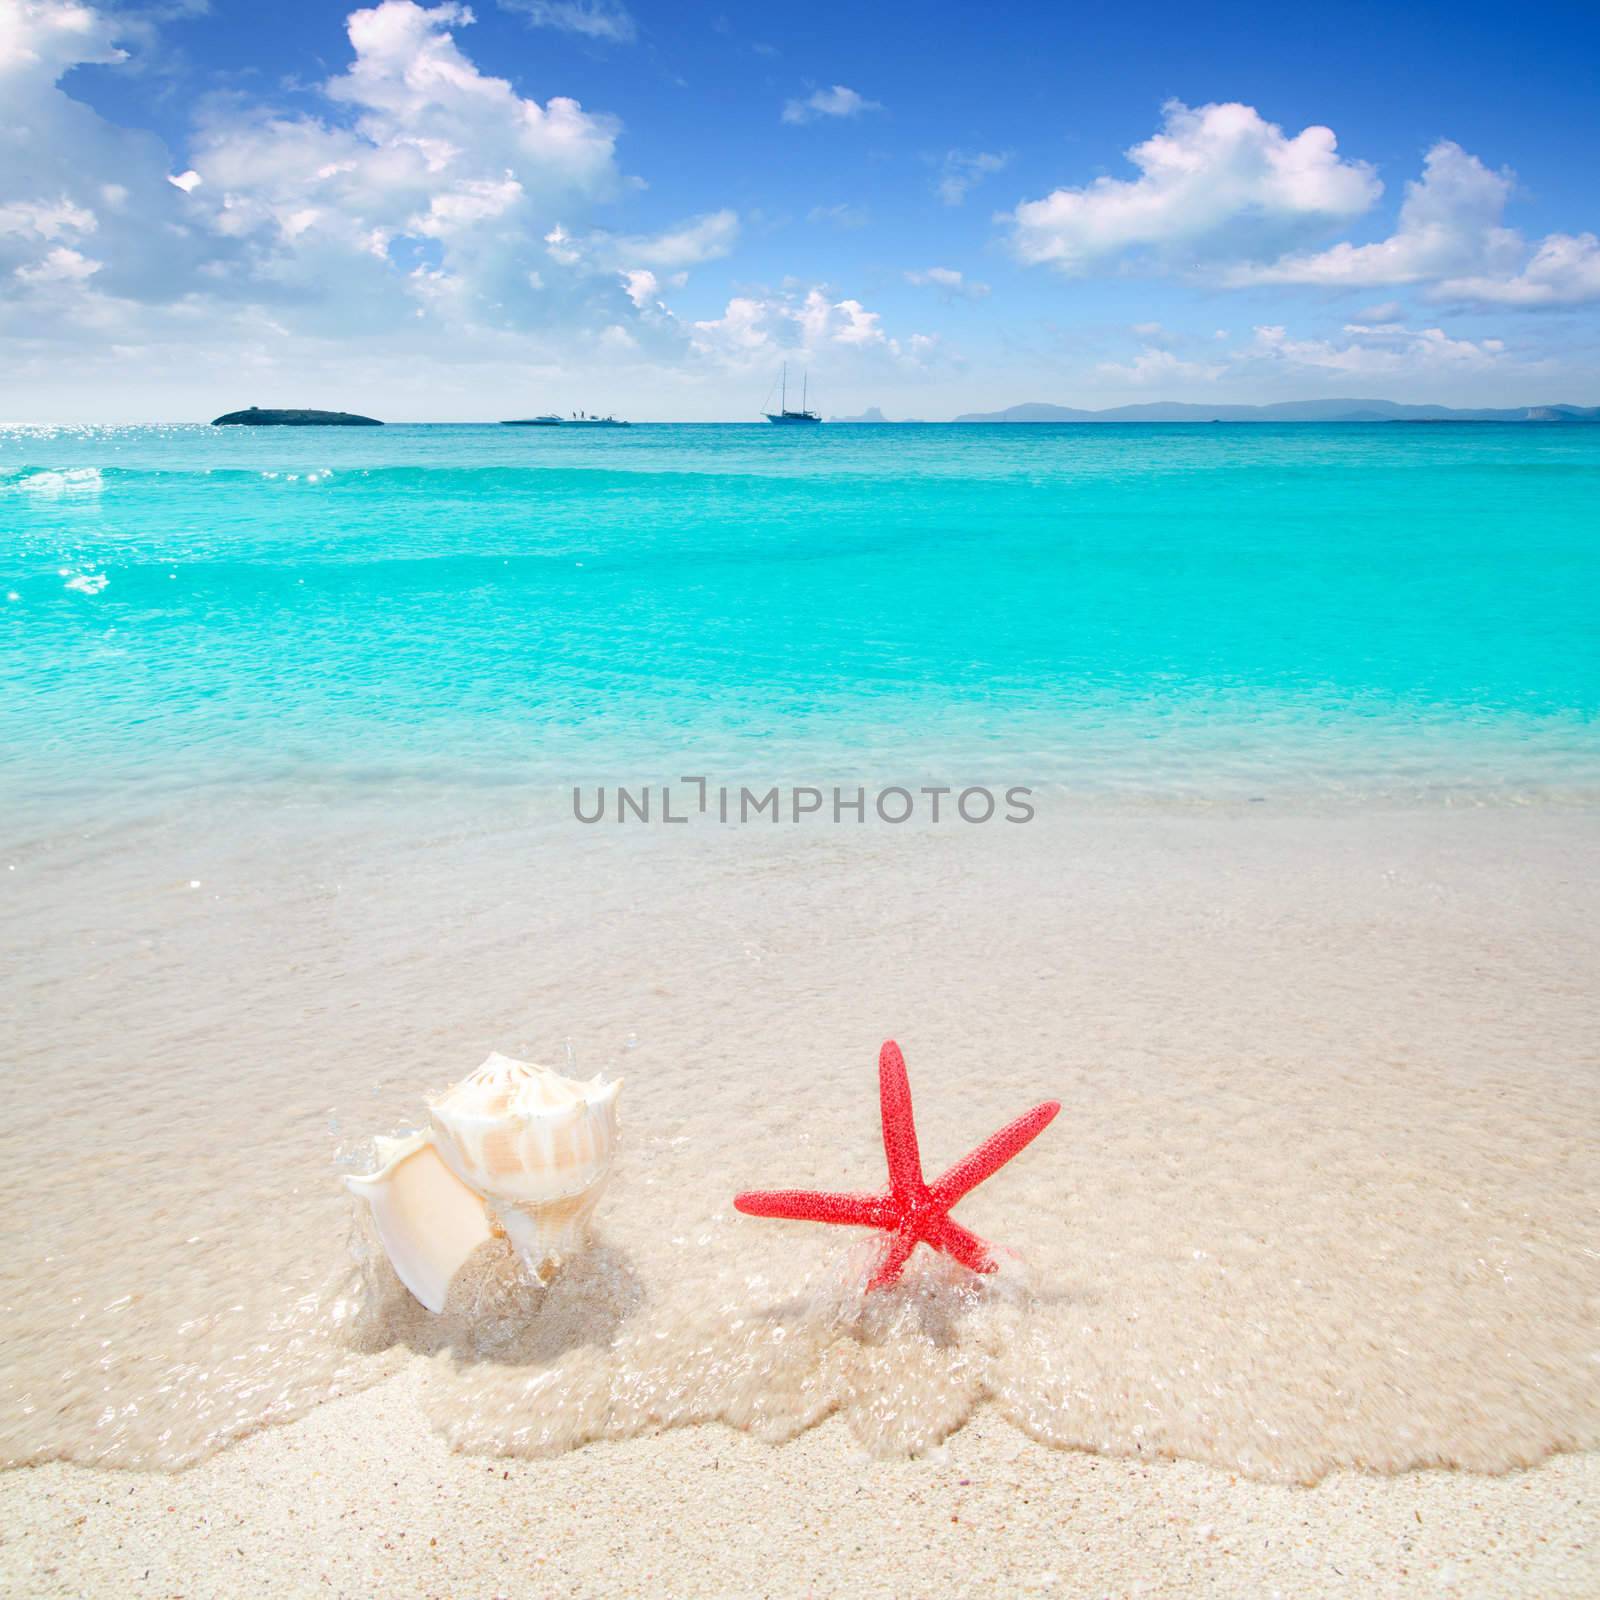 Starfish and seashell in white sand beach with turquoise tropical water